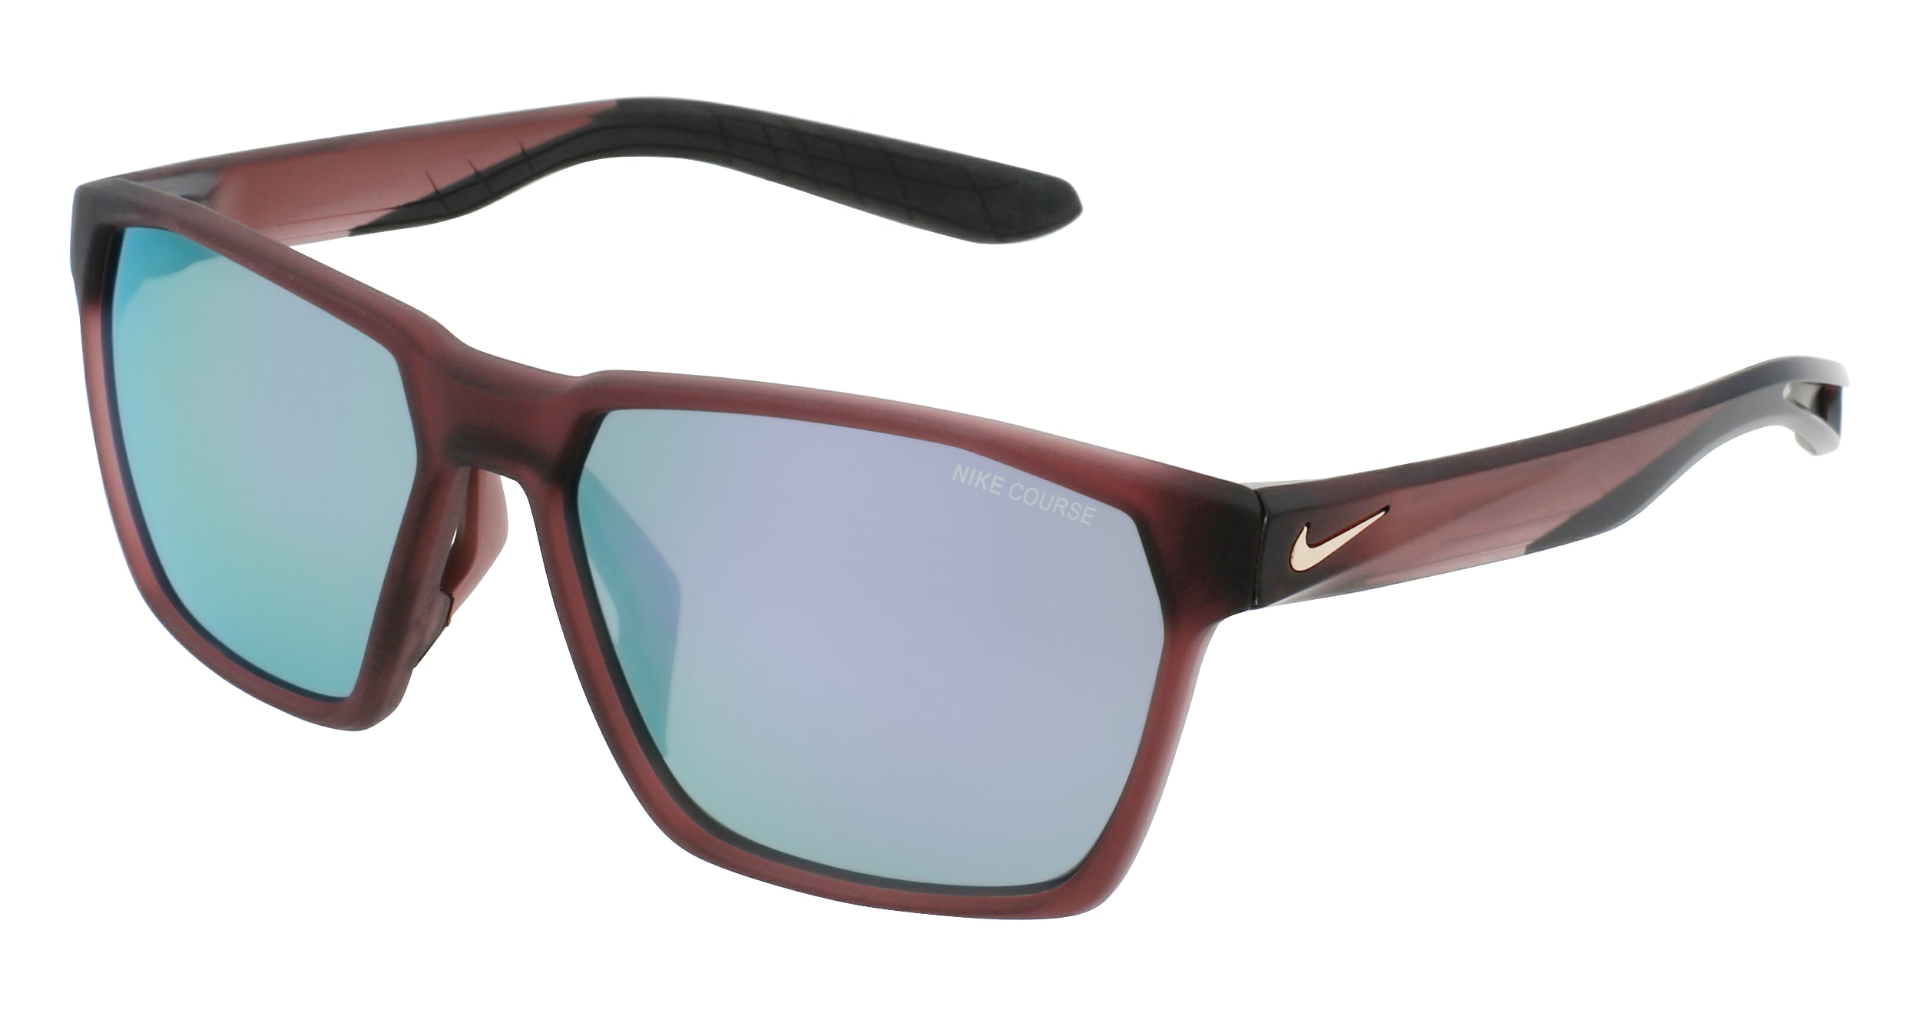 Best Polarized Sunglasses for Small Faces